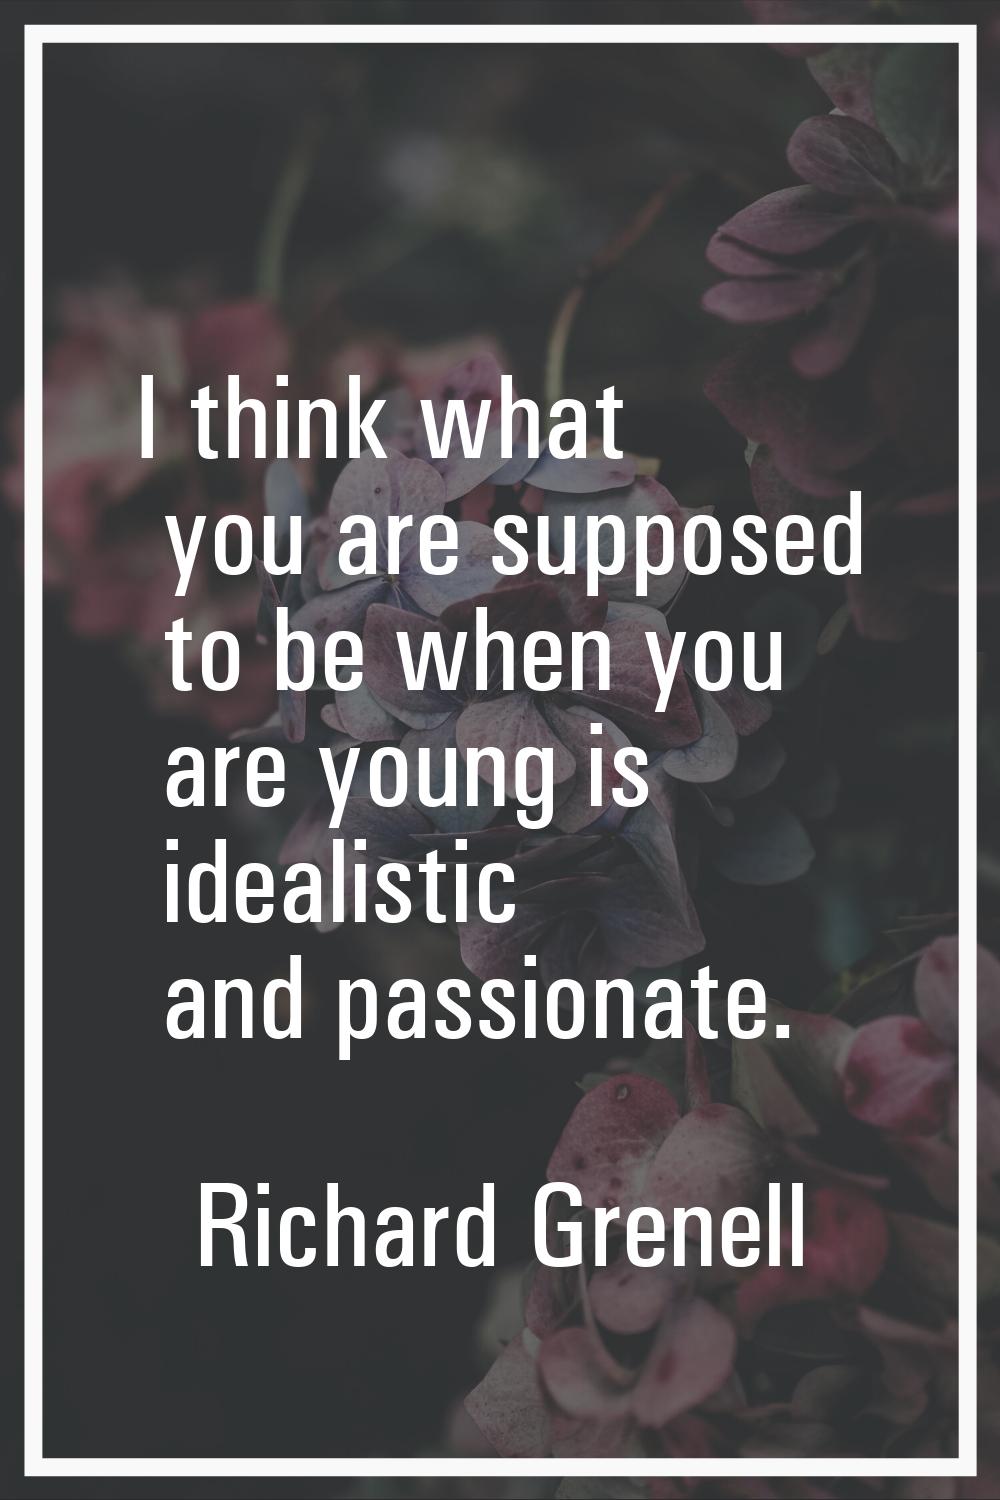 I think what you are supposed to be when you are young is idealistic and passionate.